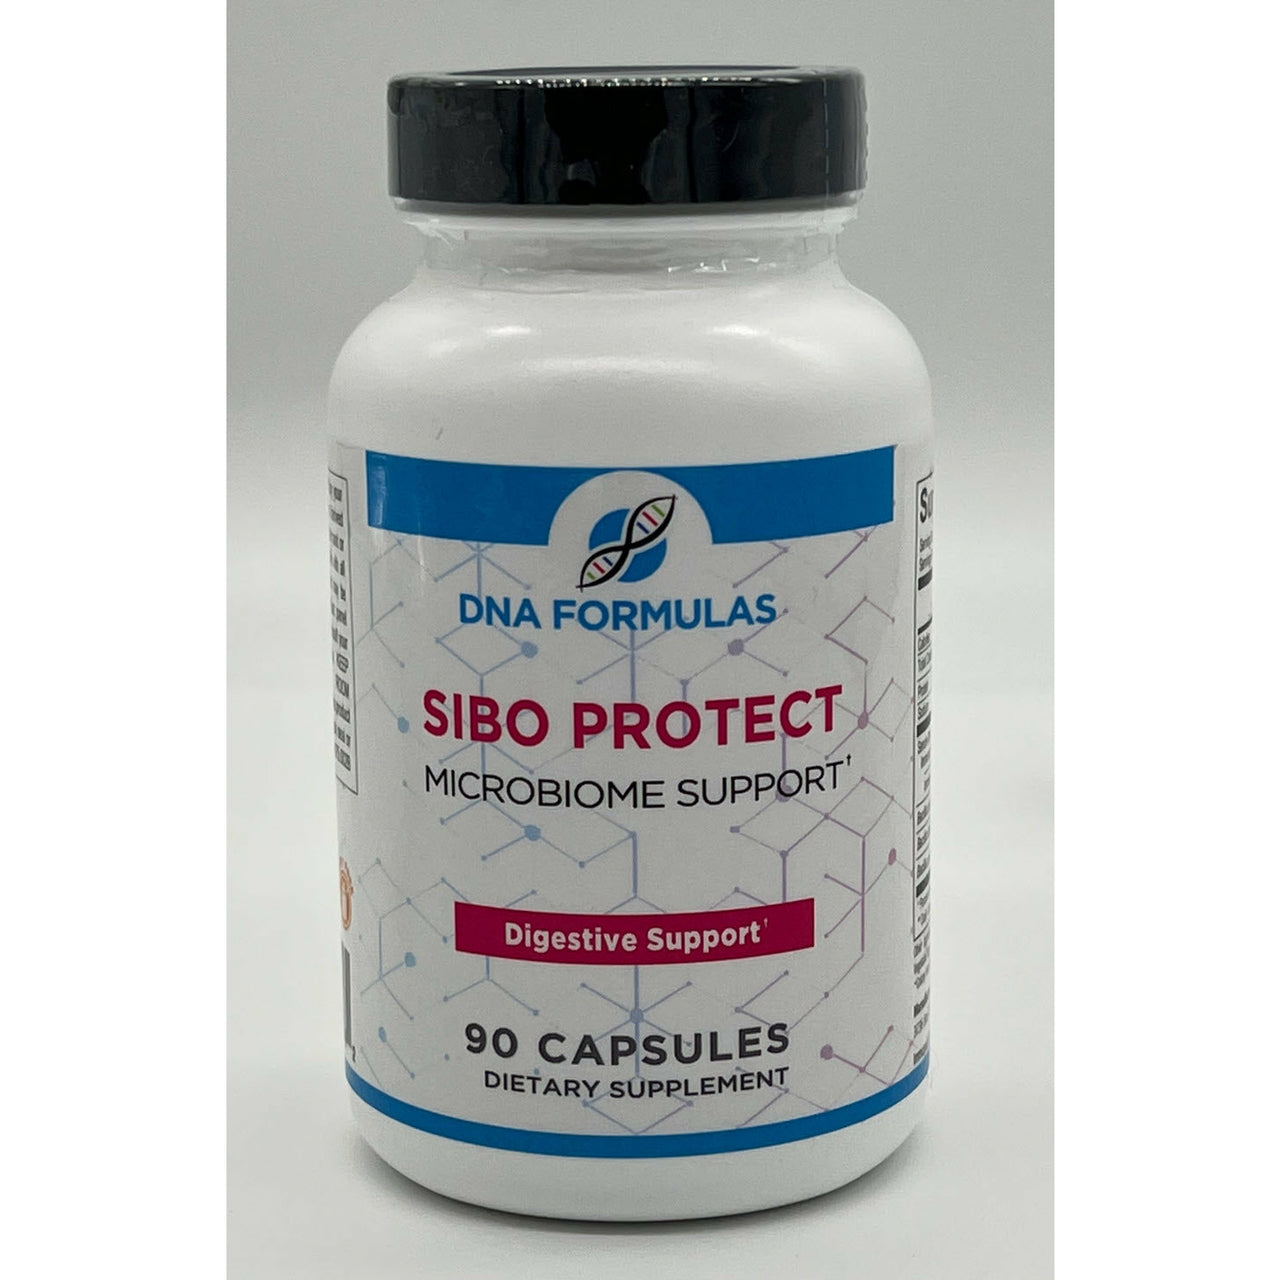 SIBO Protect - DNA Formulas - Broad-spectrum Probiotic Formula for Small Intestinal Bacterial Overgrowth